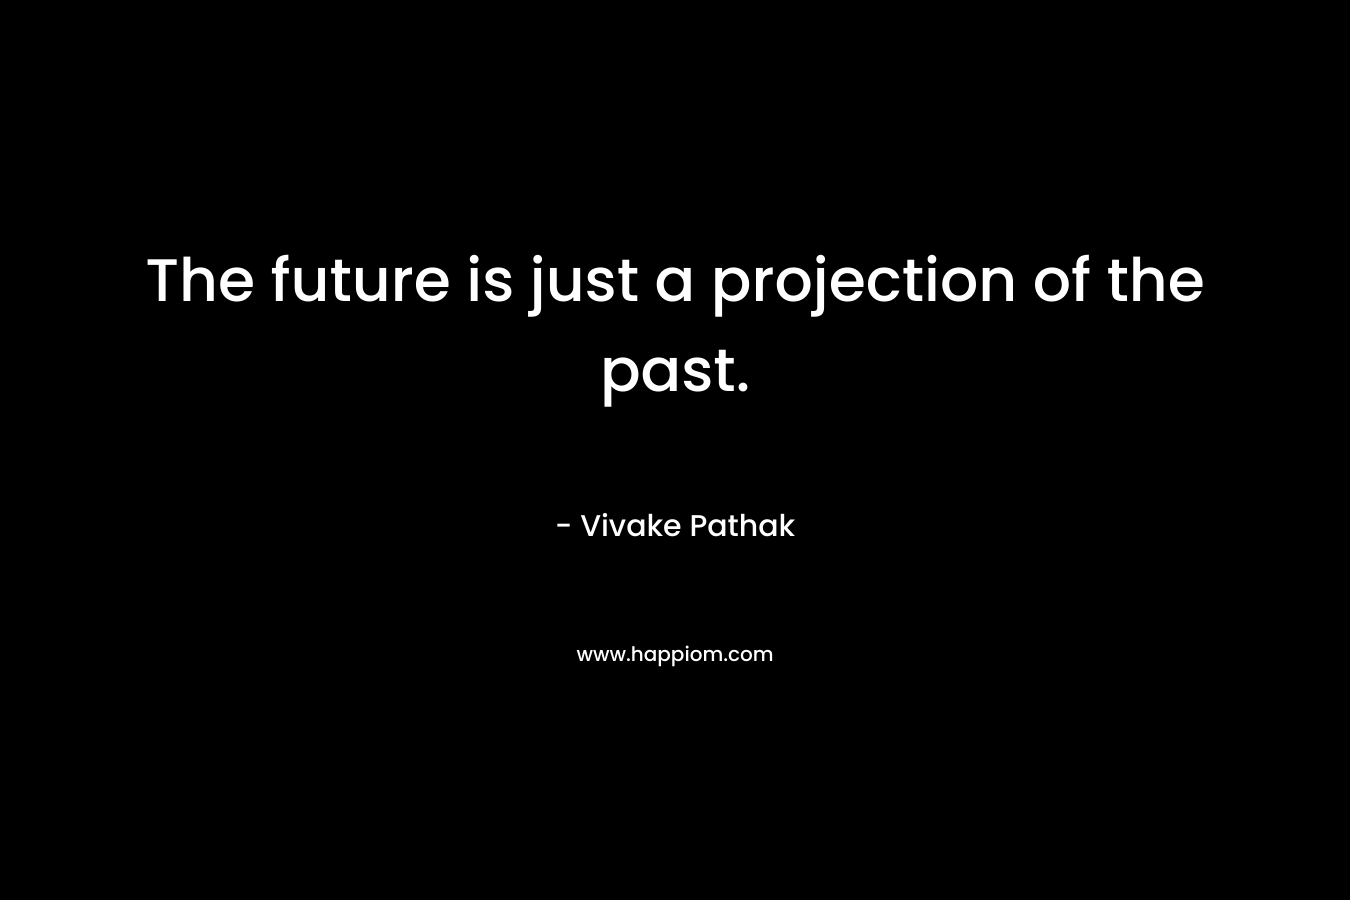 The future is just a projection of the past.